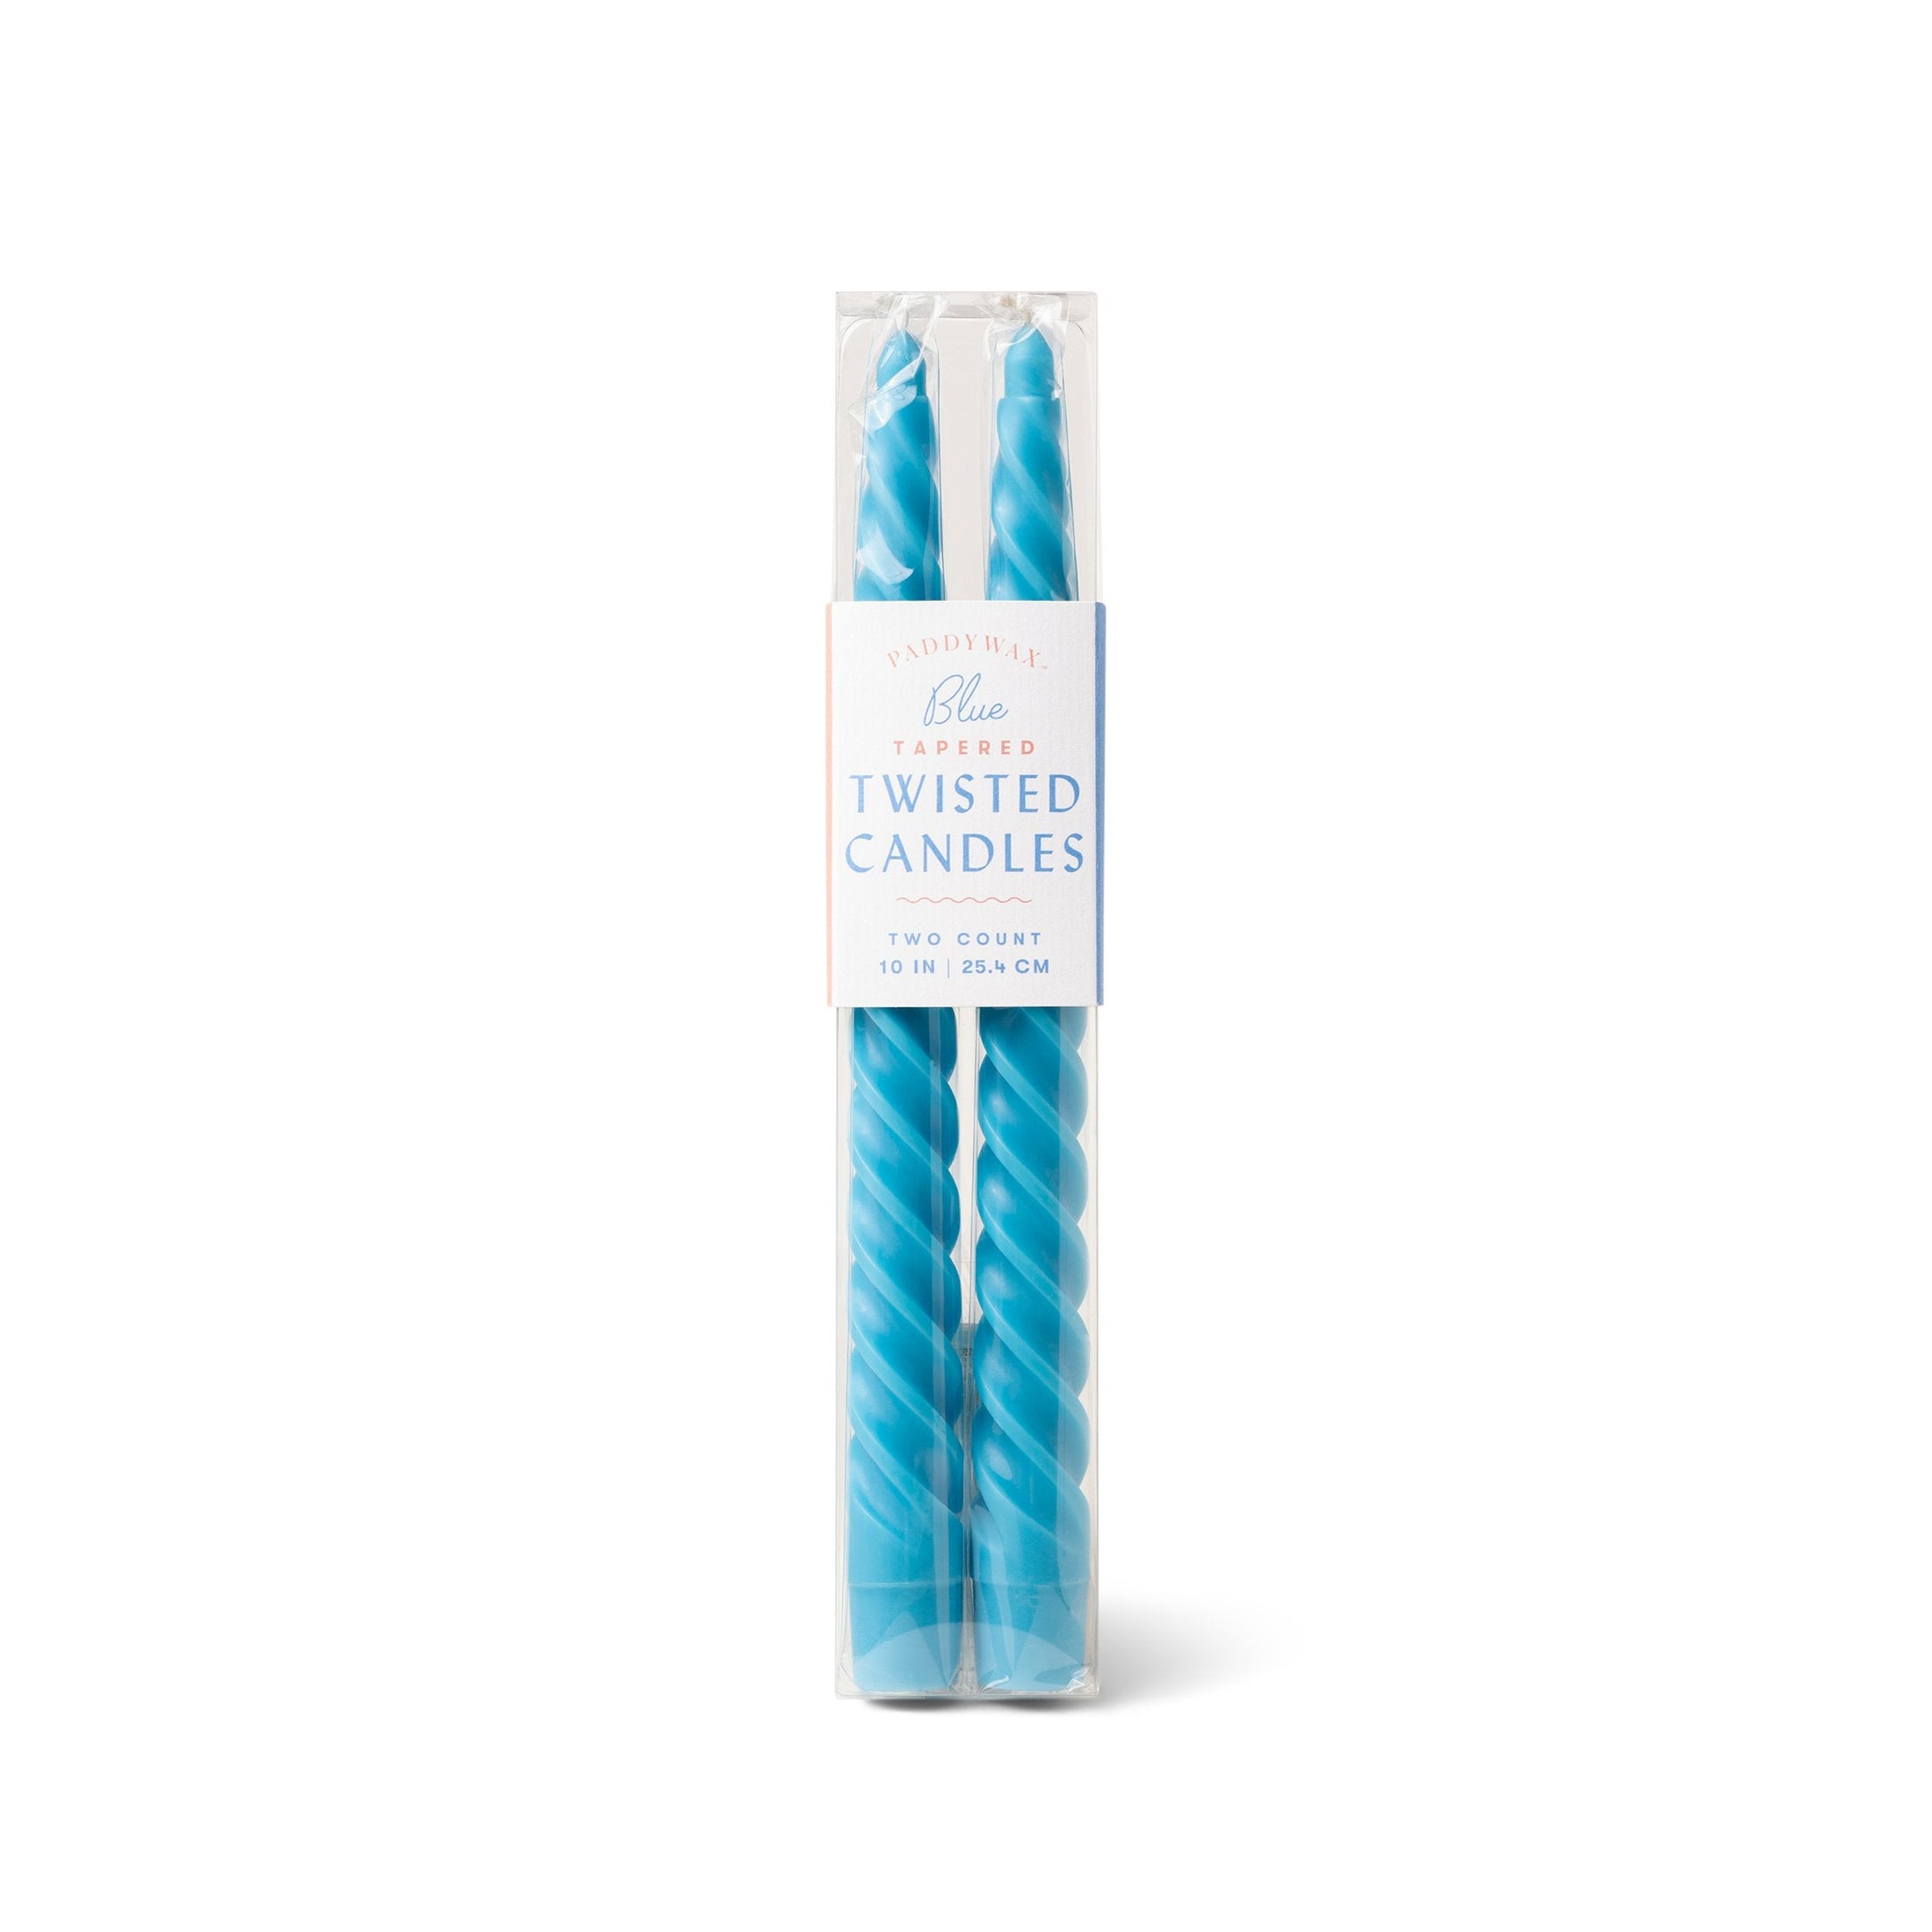 Twisted Taper Candles Blue